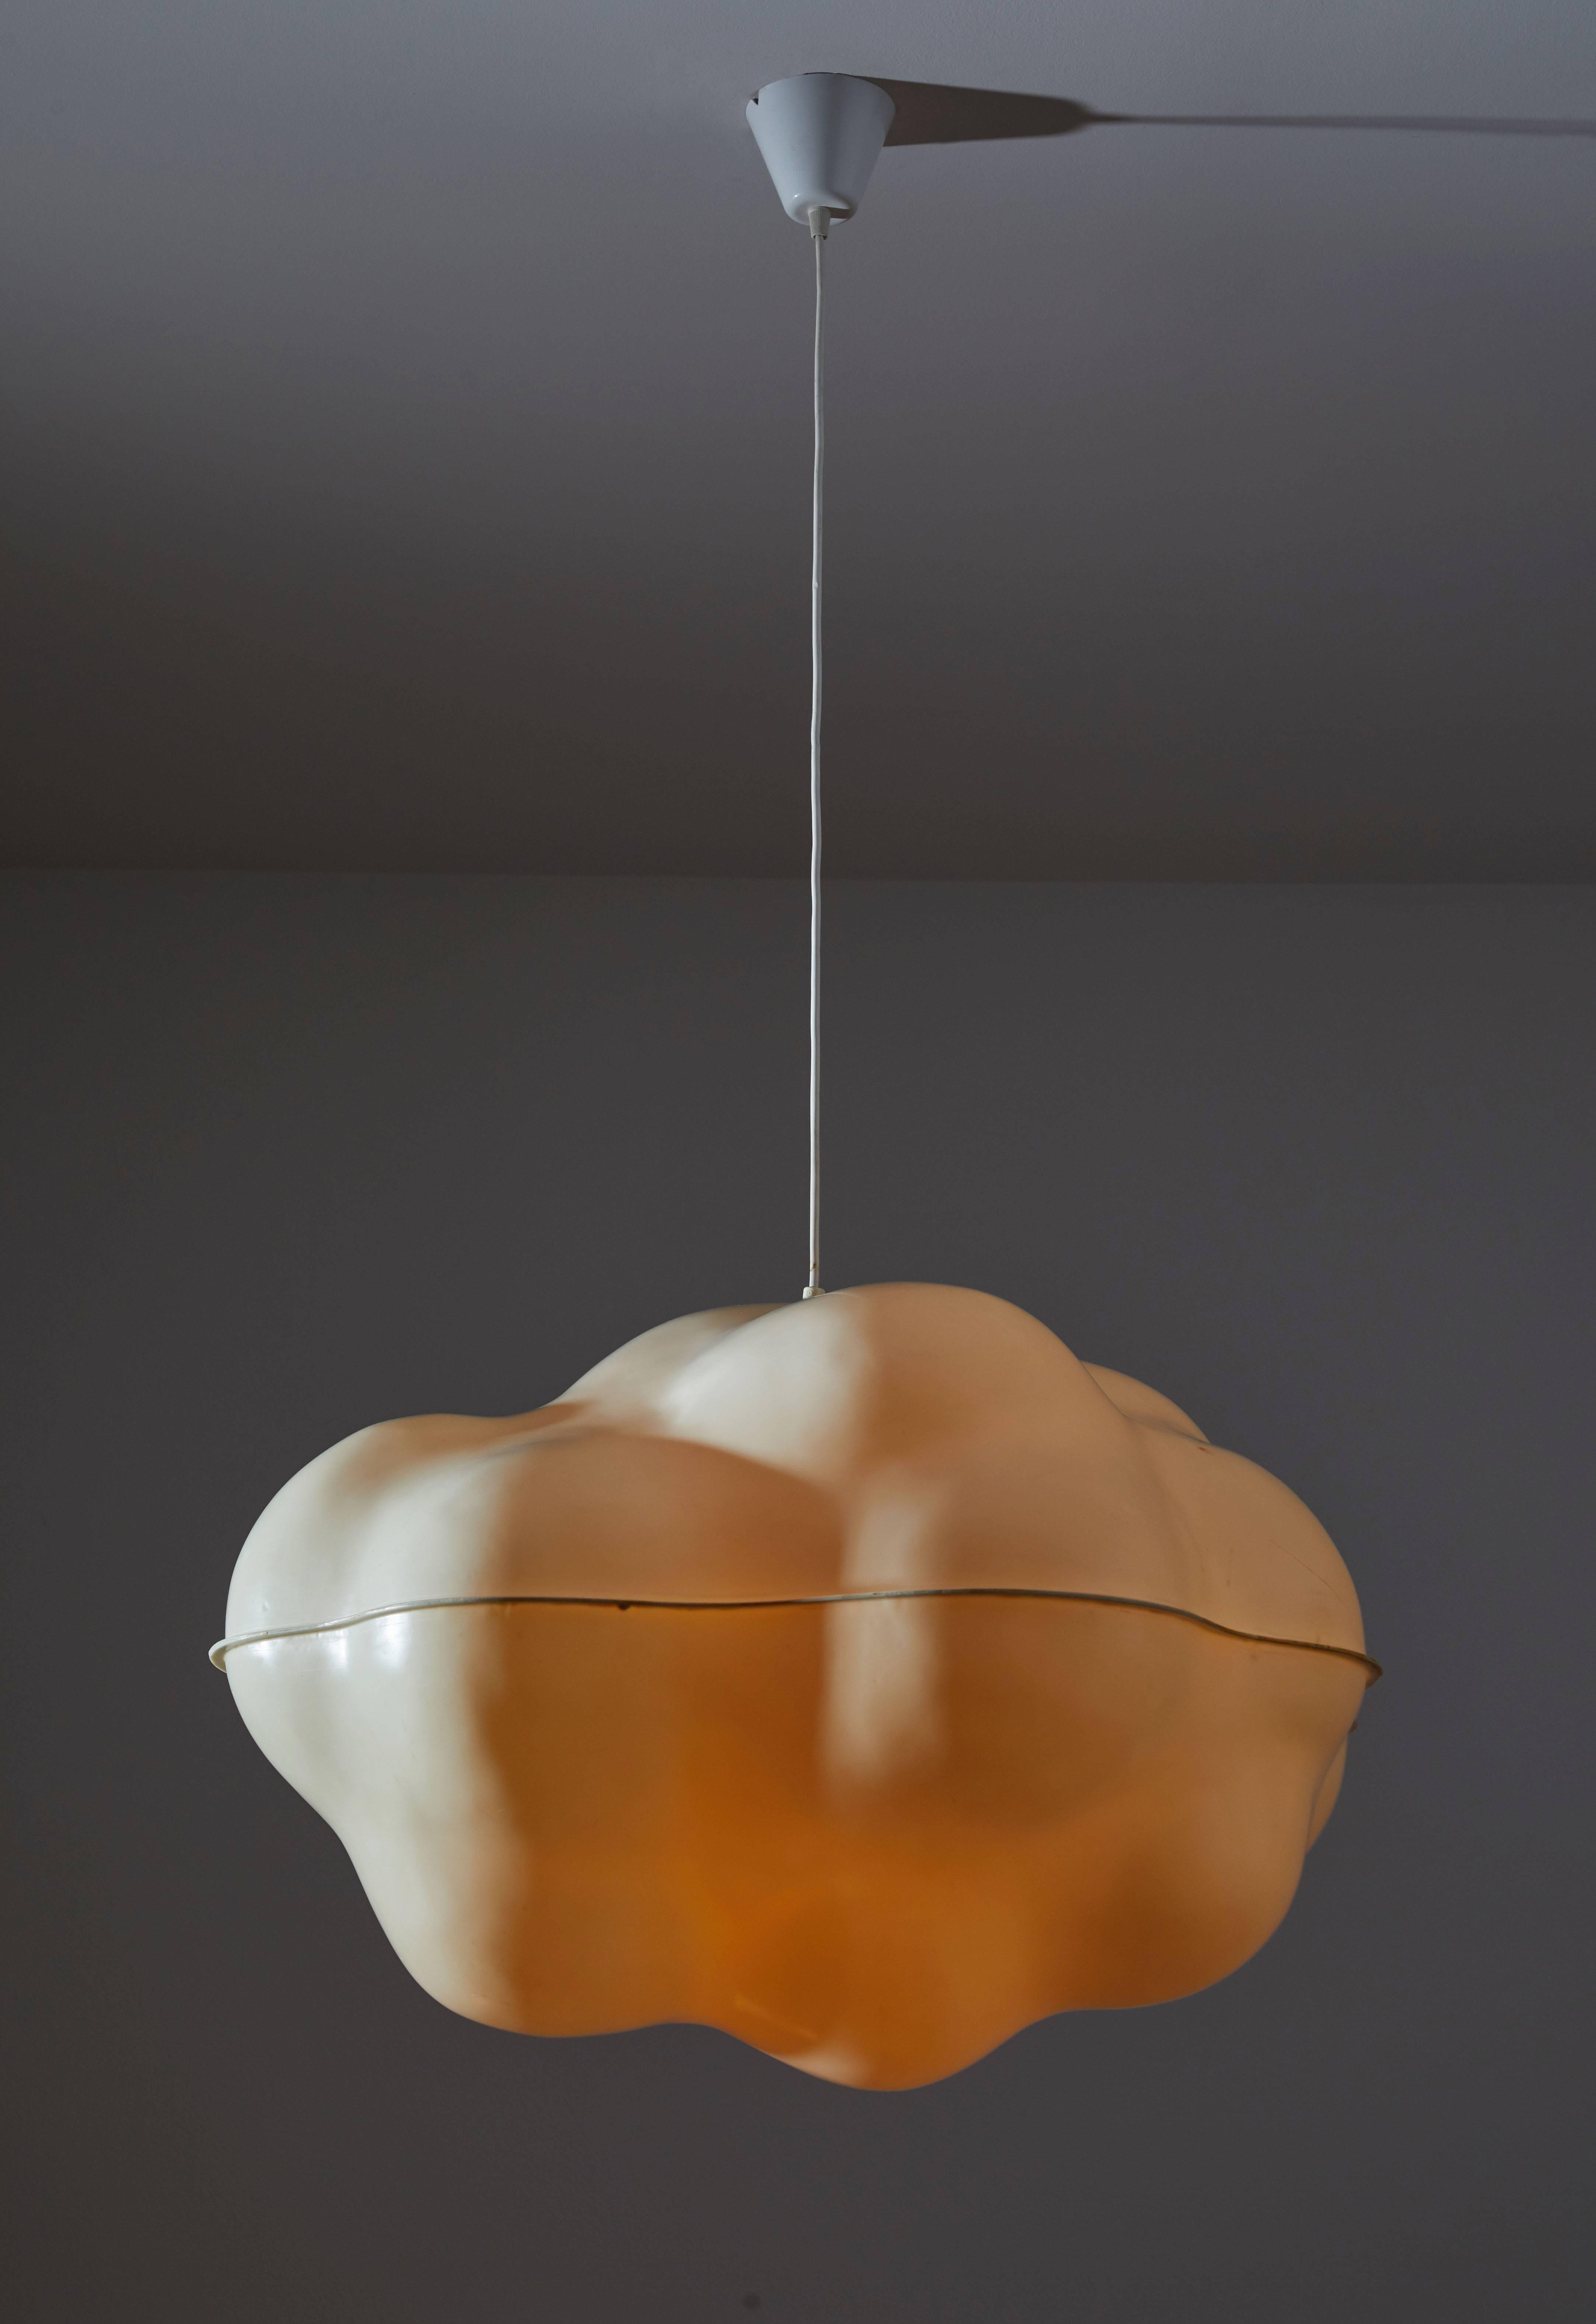 Rare first edition hanging cloud light composed by Susi and Ueli Berger for J. Lüber. Manufactured in Switzerland, 1976. Made from polystyrol. Rewired for US junction boxes Takes one E27 75 w maximum bulb. Literature : Museum für Gestaltung Zürich